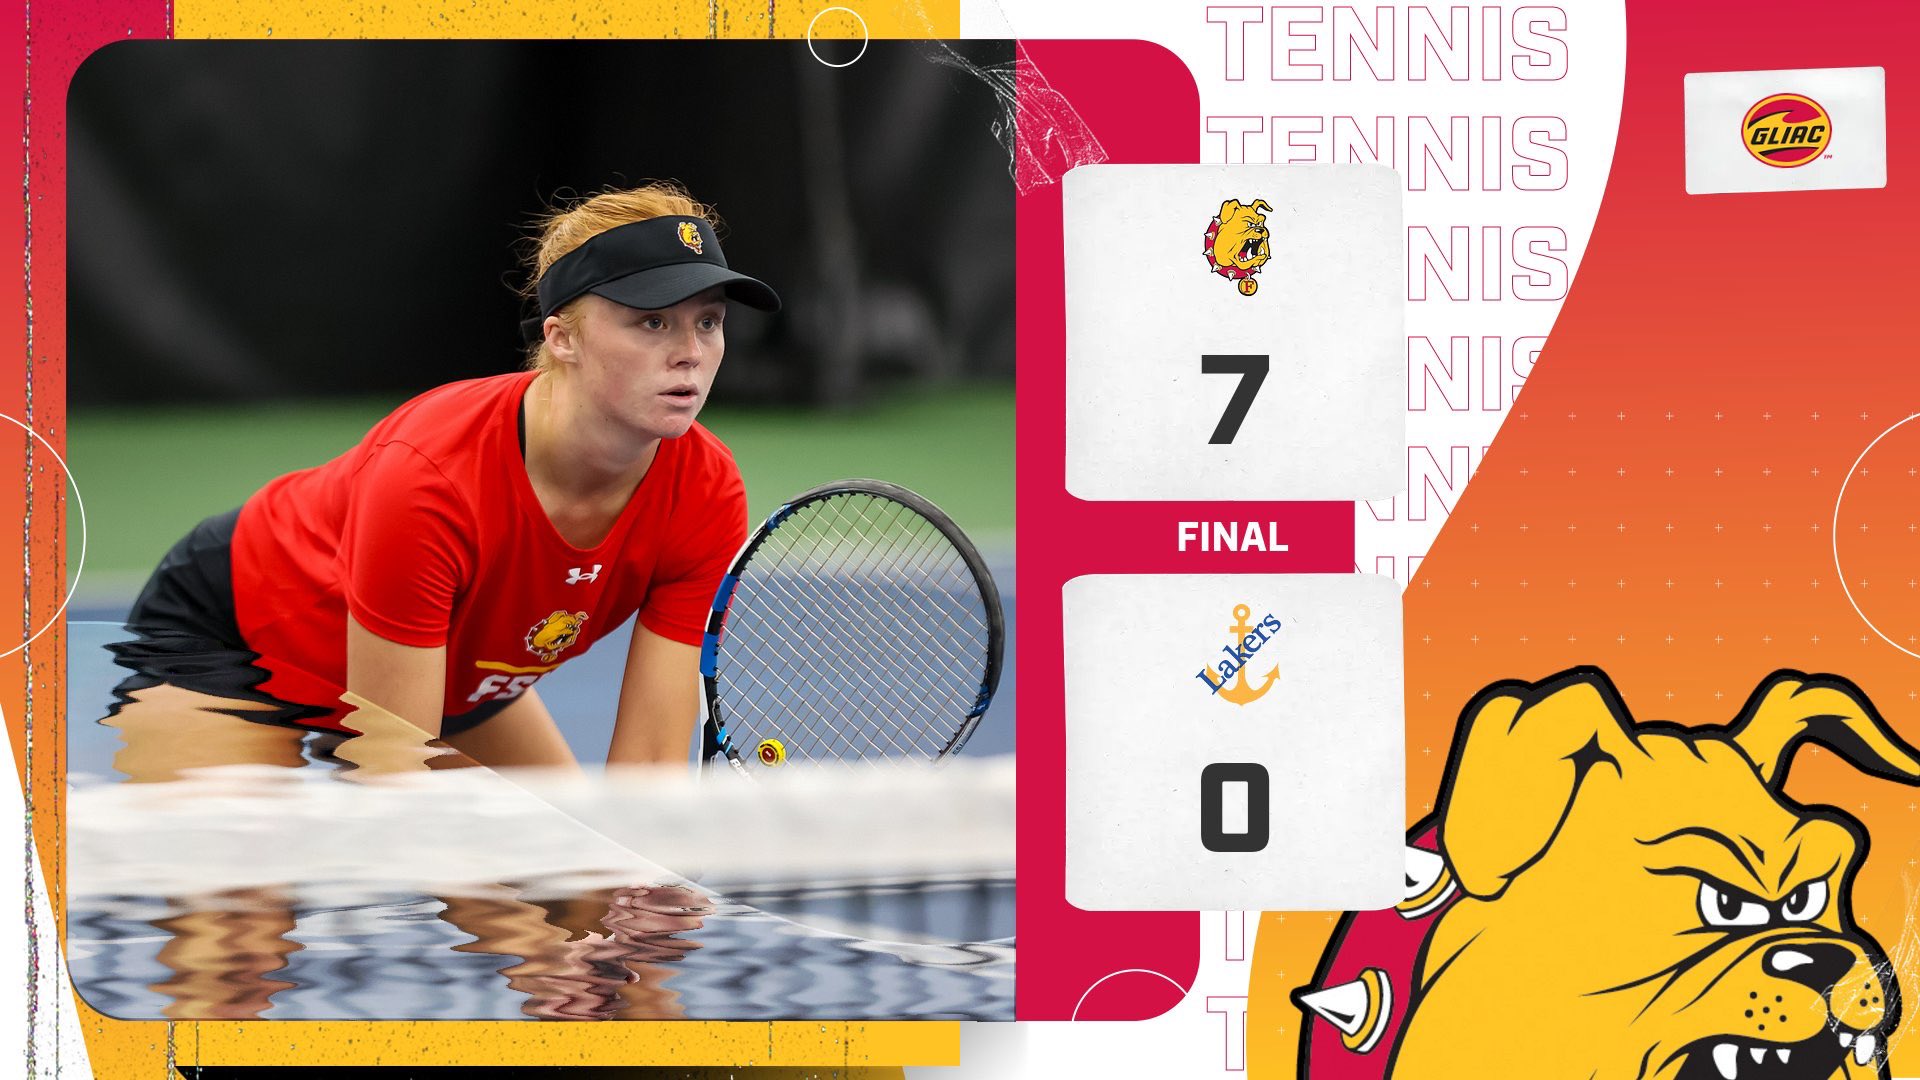 Ferris State Women's Tennis Closes Out Regular-Season With Big Win To Earn League's #2 Seed